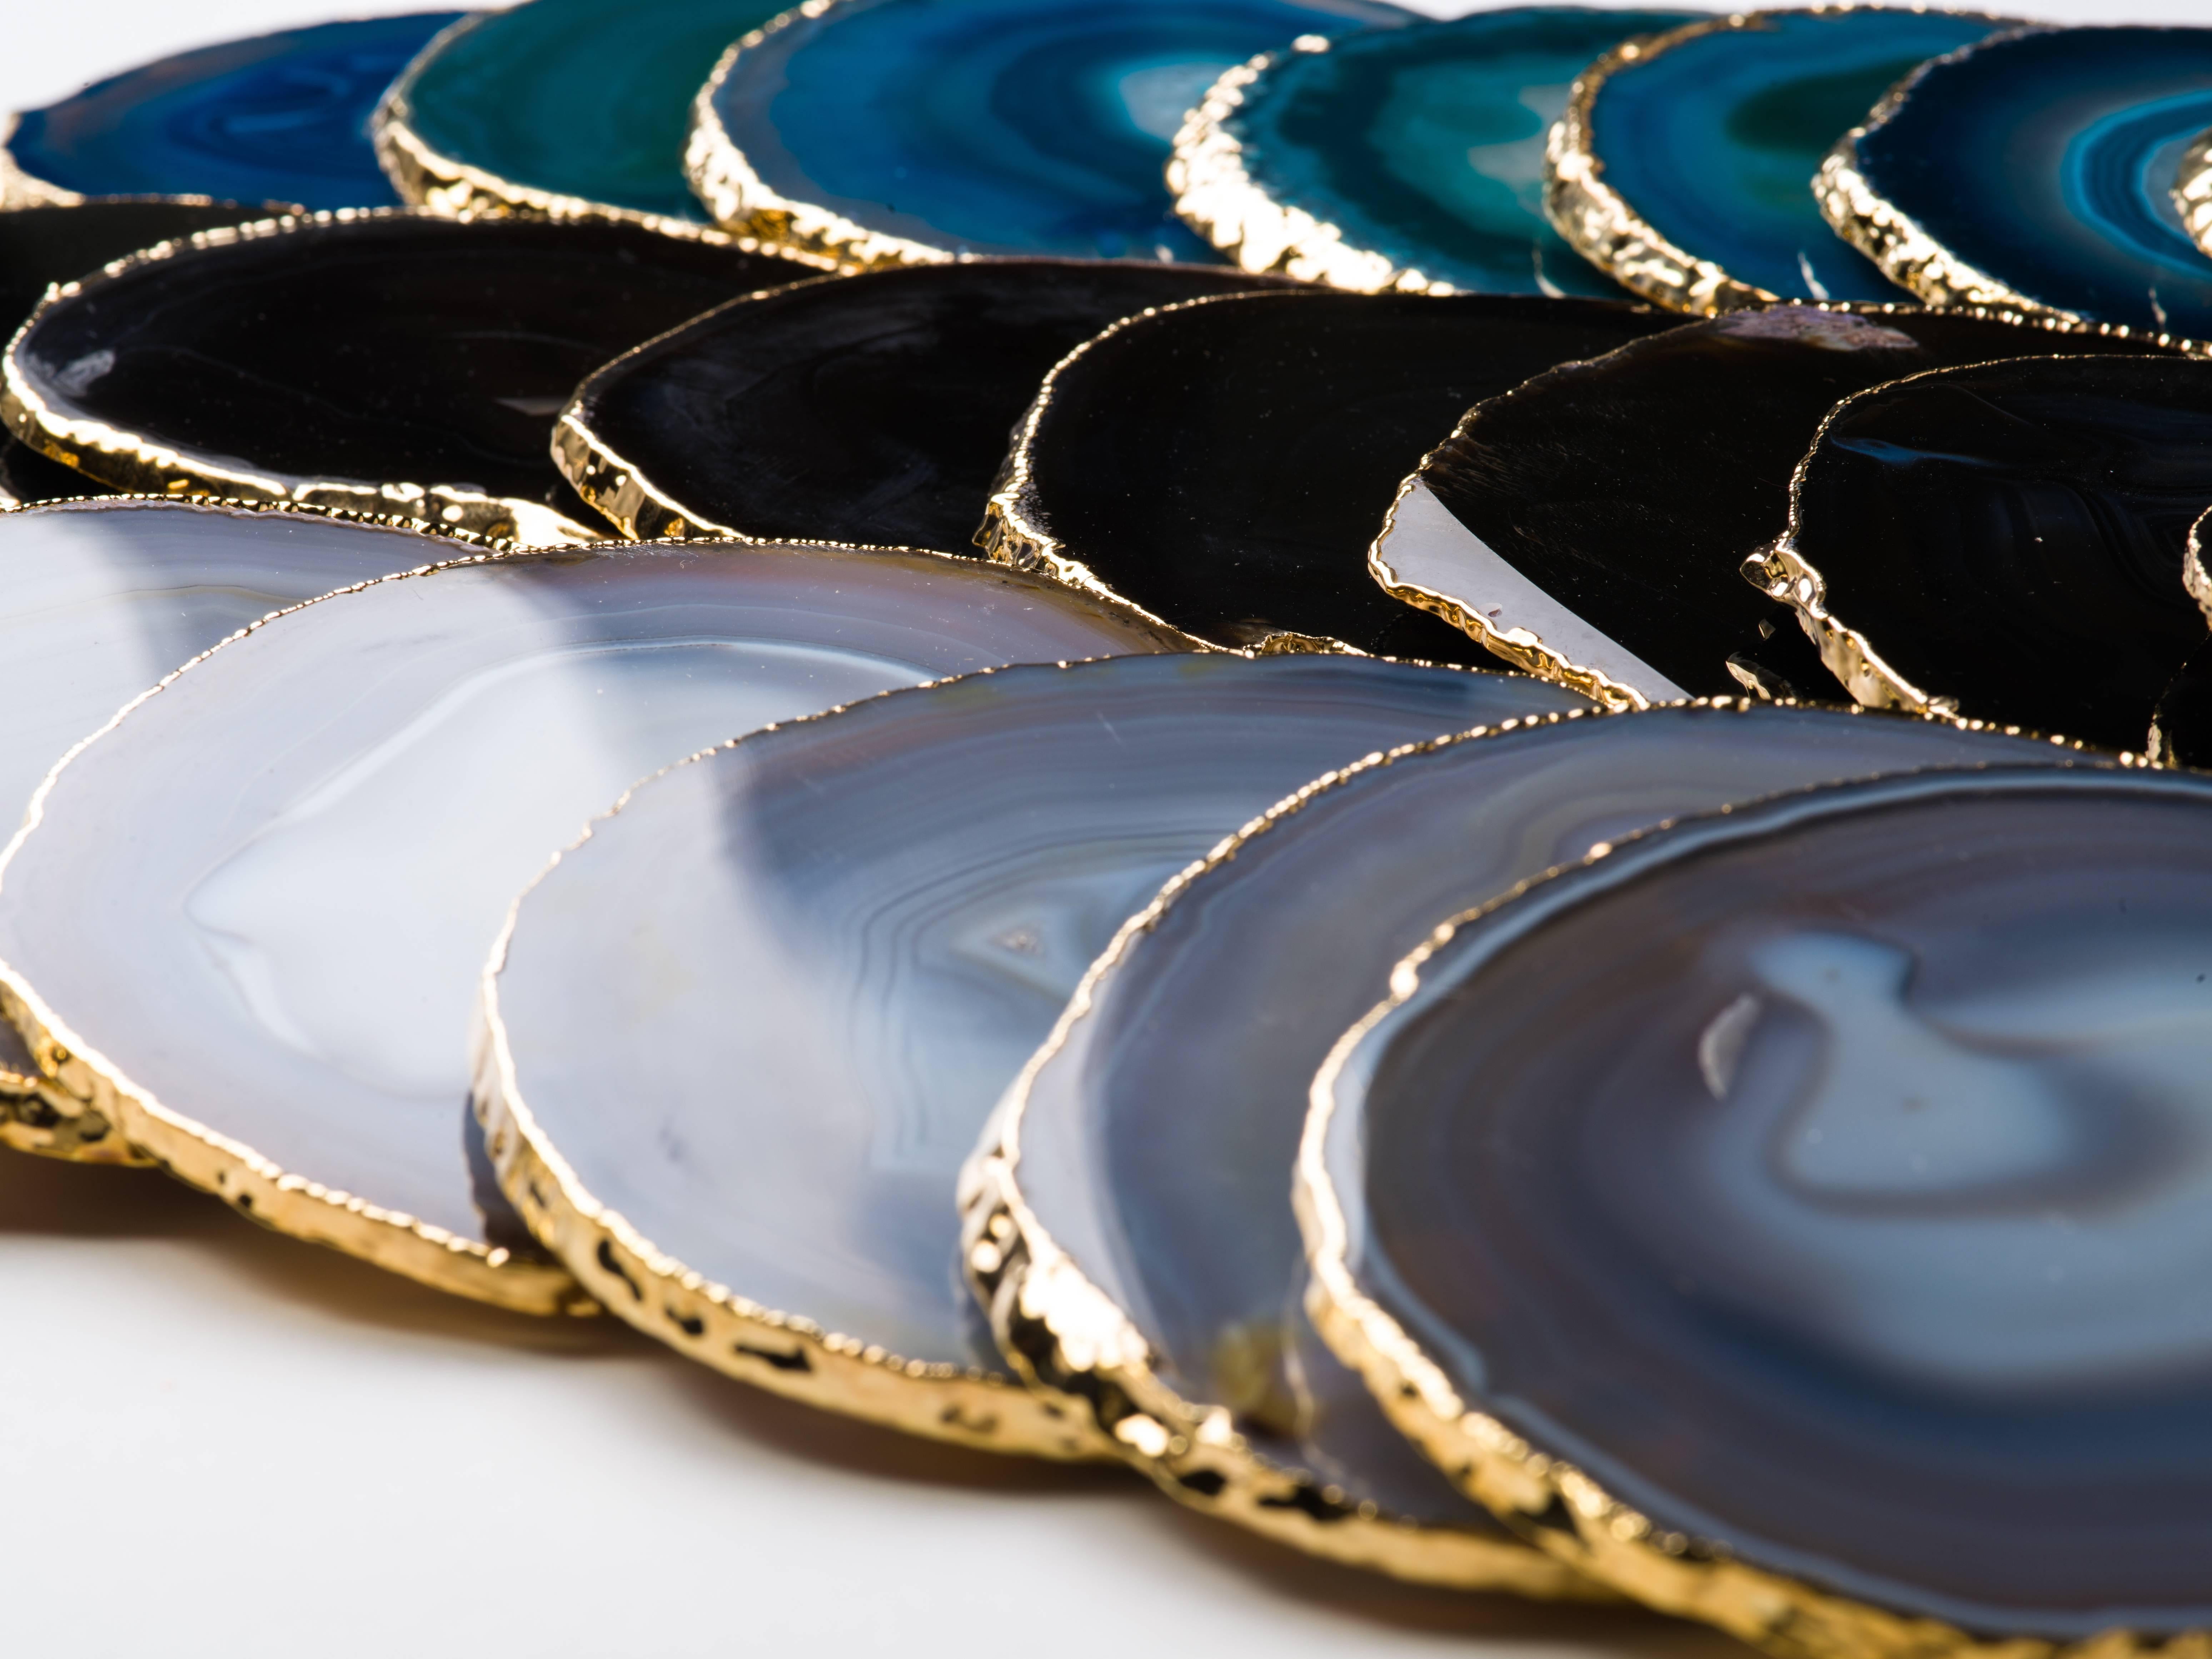 Natural Agate and Crystal Coasters in Teal with 24-Karat Gold Trim, Set/8 For Sale 4